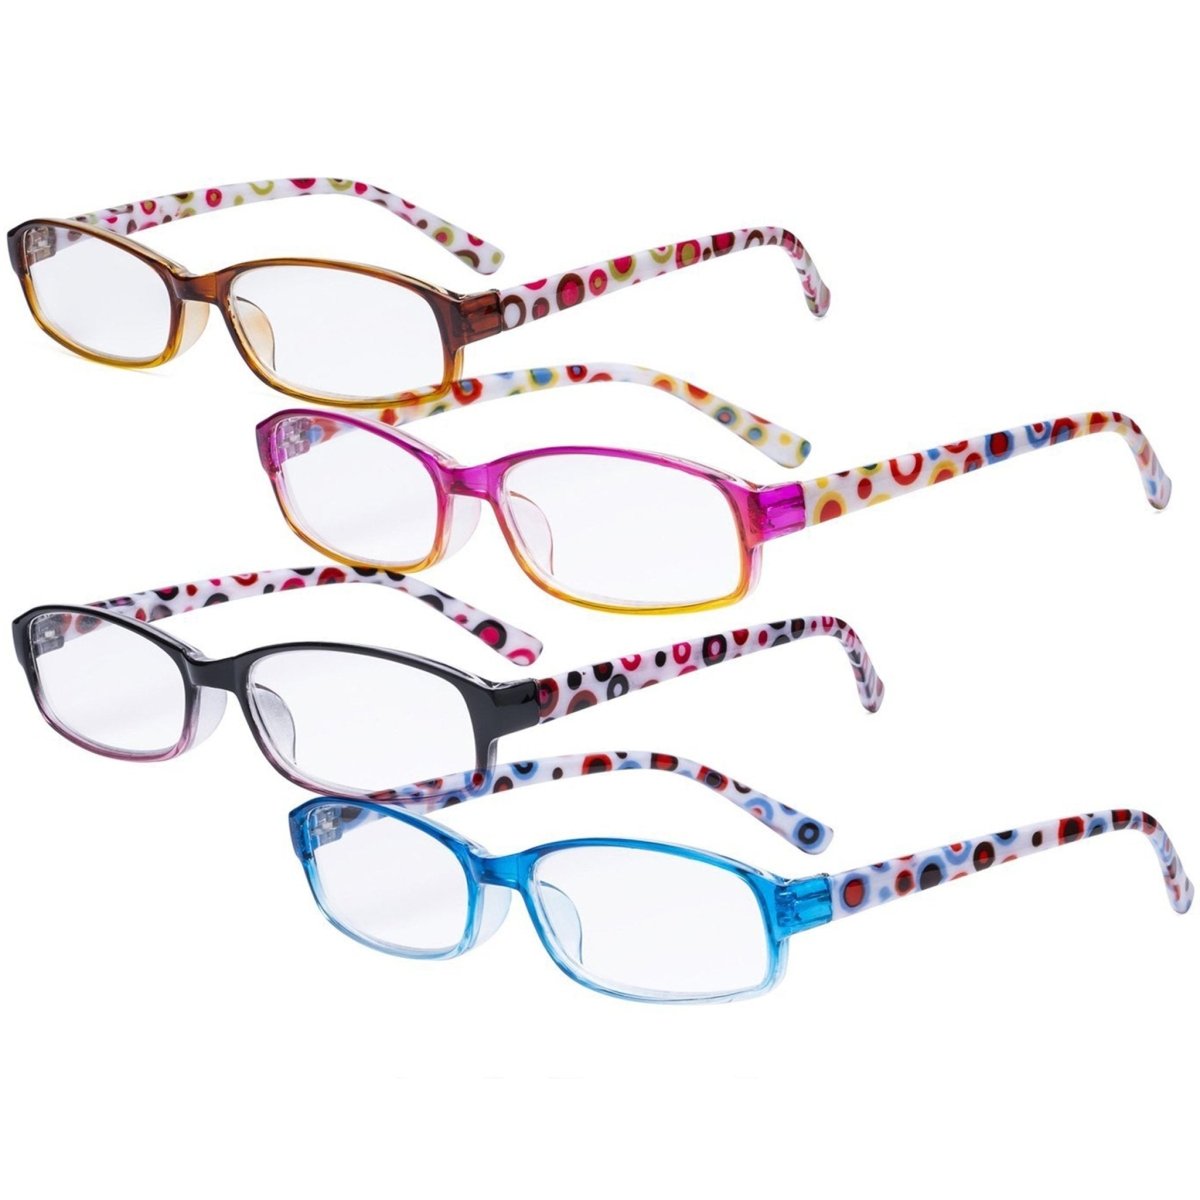 4 Pack Reading Glasses with Polka Dots Temples R908PCeyekeeper.com